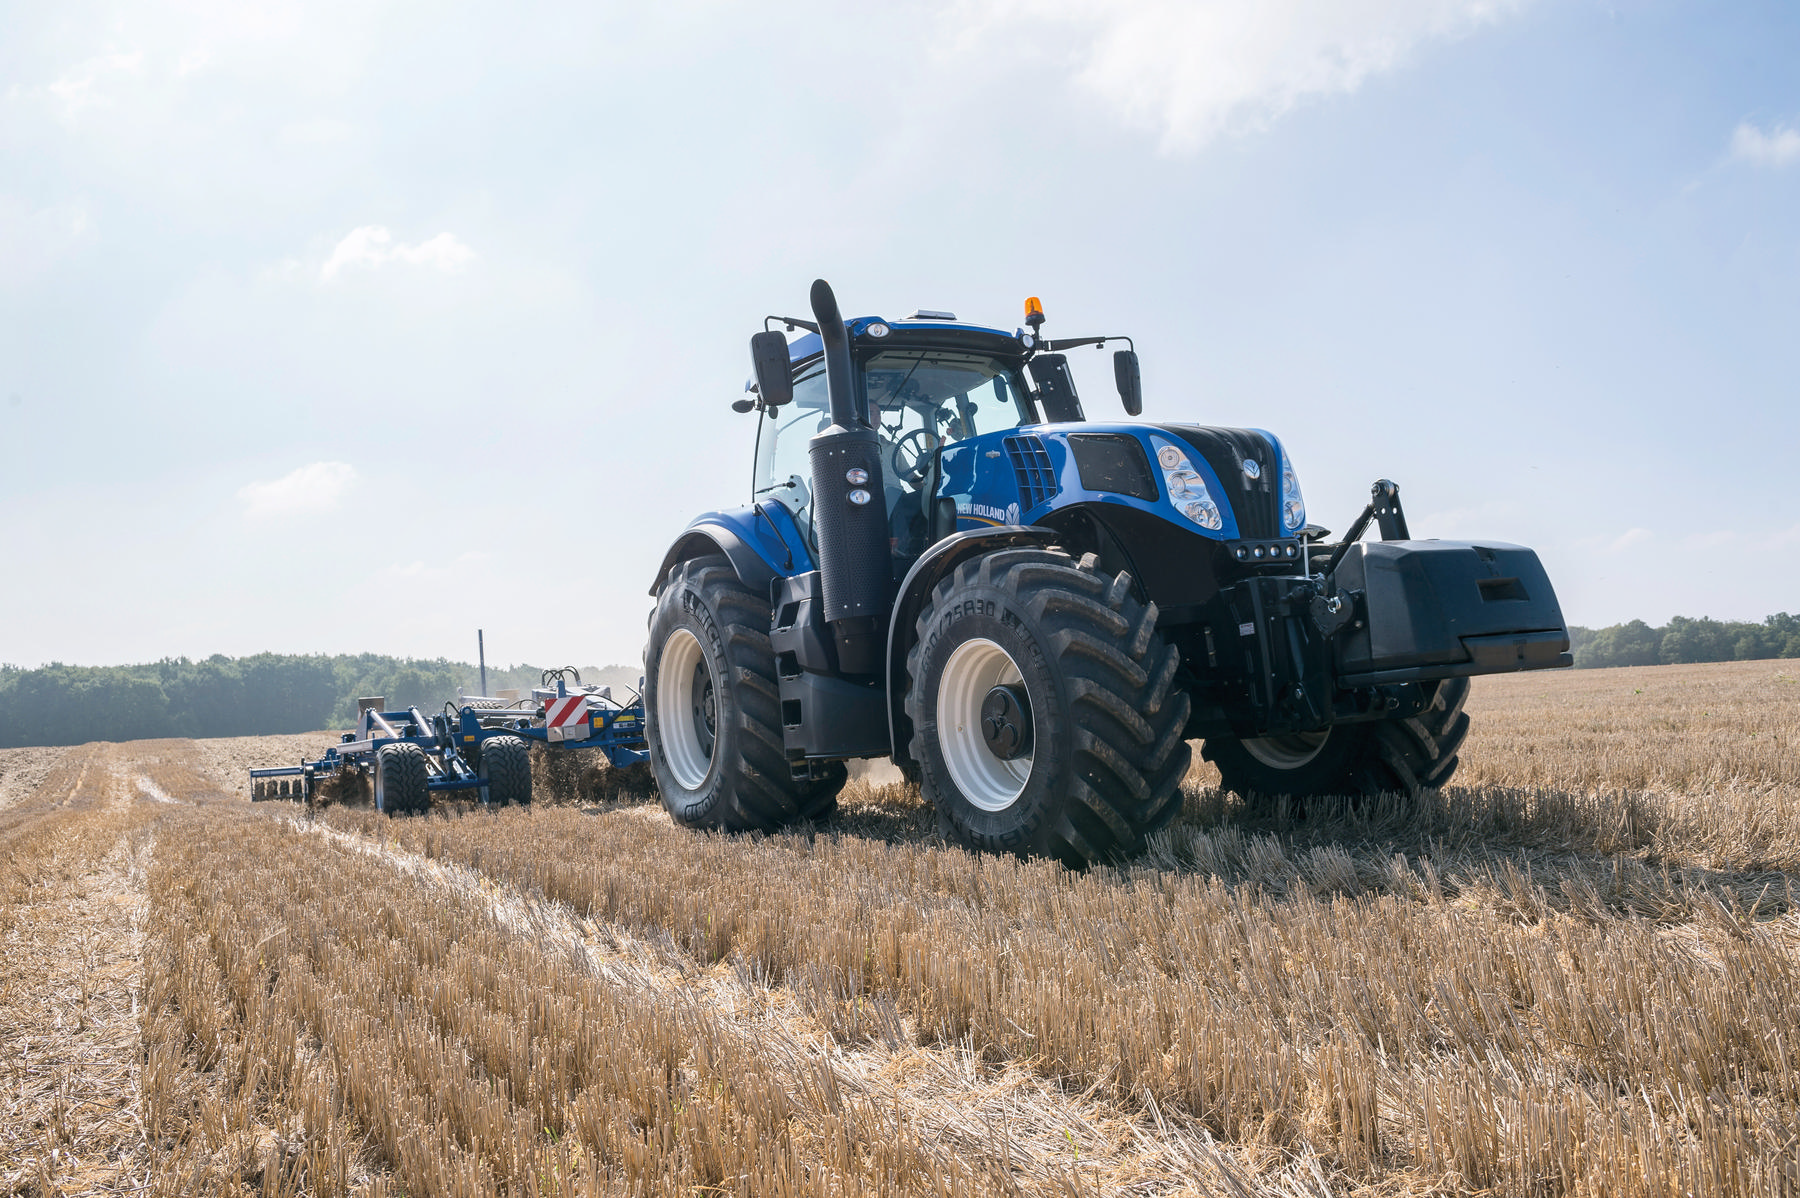 Other New Holland tractors which will be demonstrated at the event